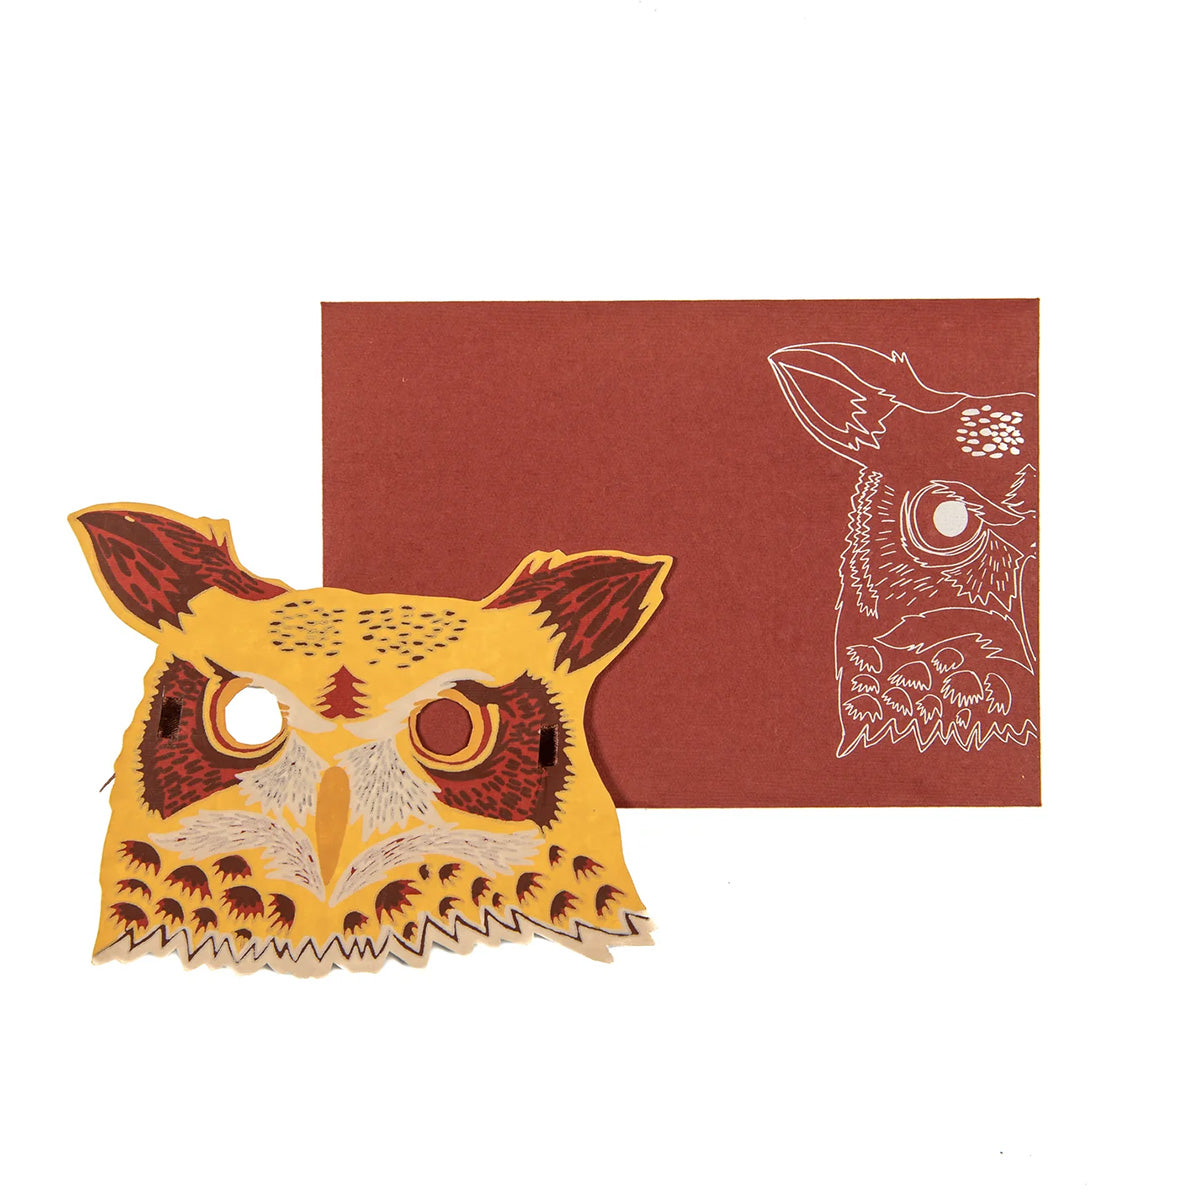 Owl shaped greetings card in front of an envelope with a illustration of an owl on it.